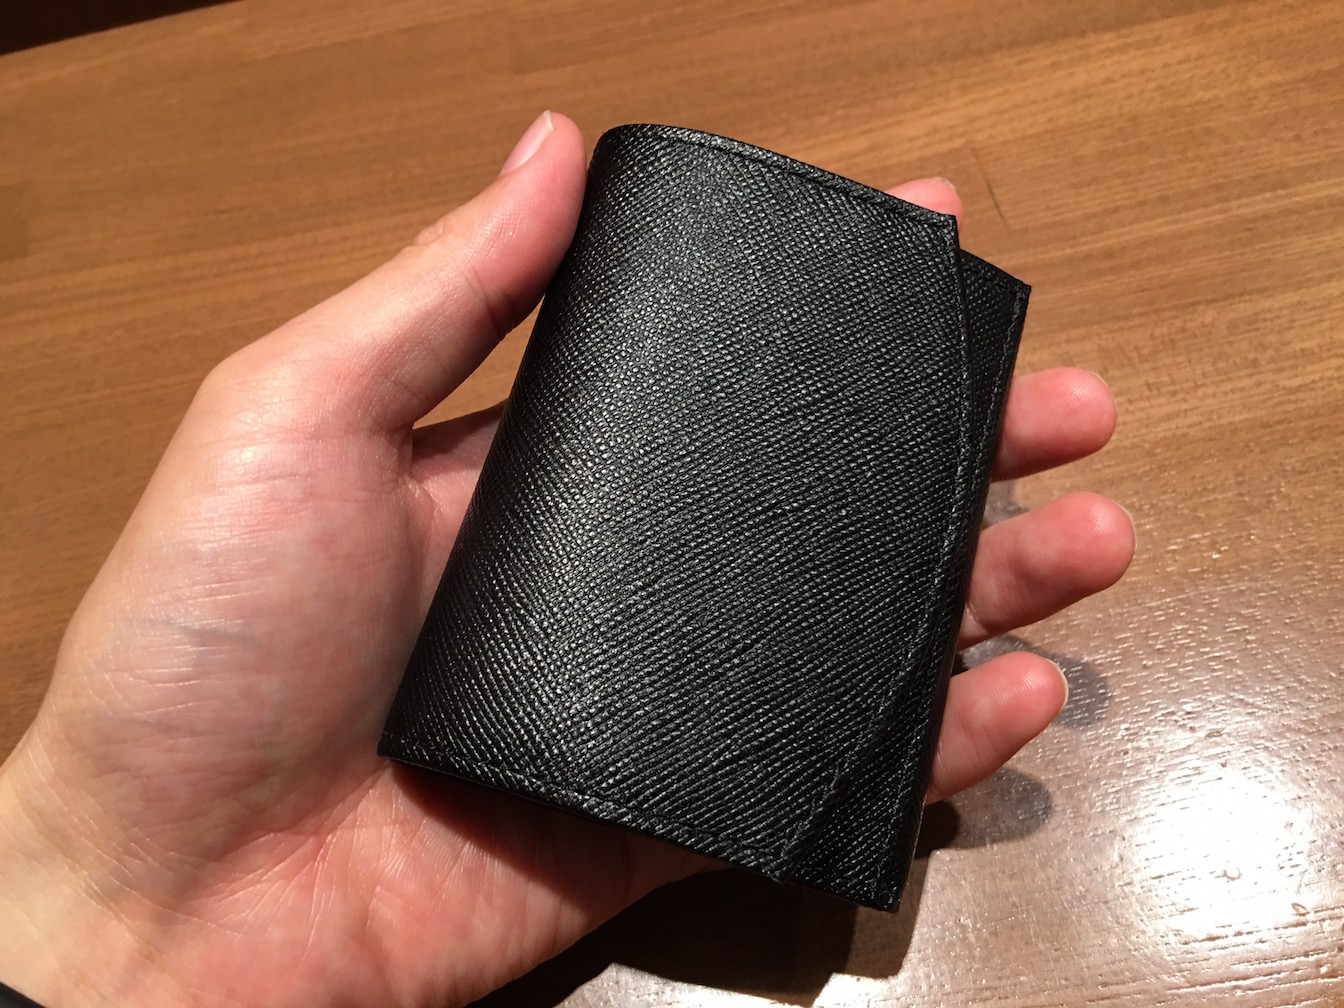 Hammock wallet compact first impression 2